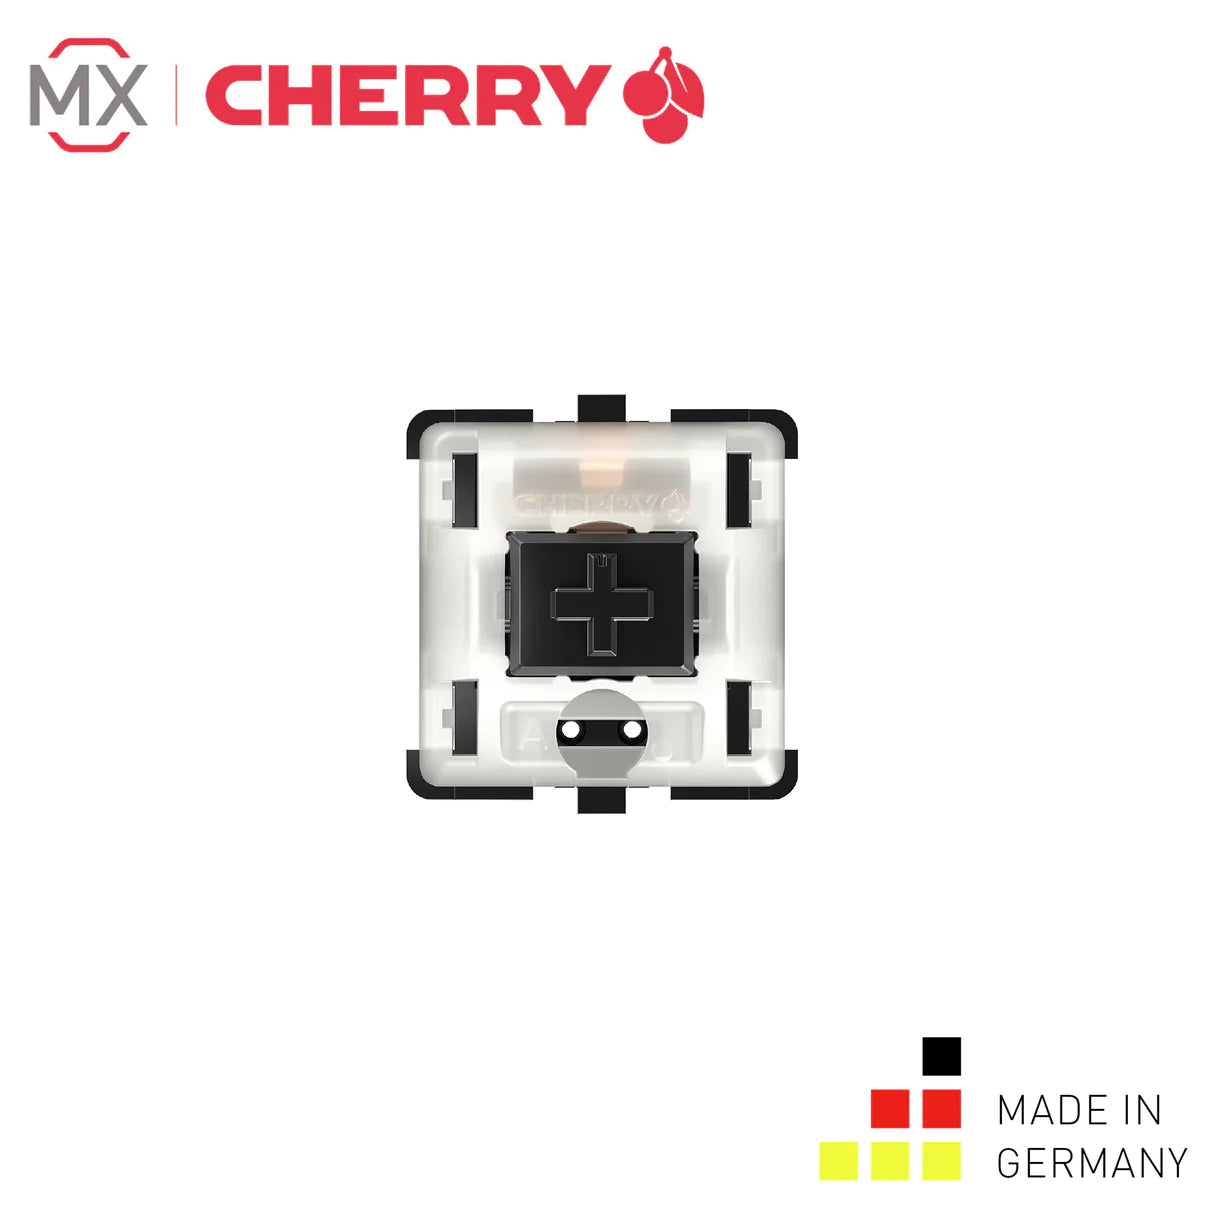 Cherry Nixie (MX Black Clear Top) Linear Switches - KeebsForAll